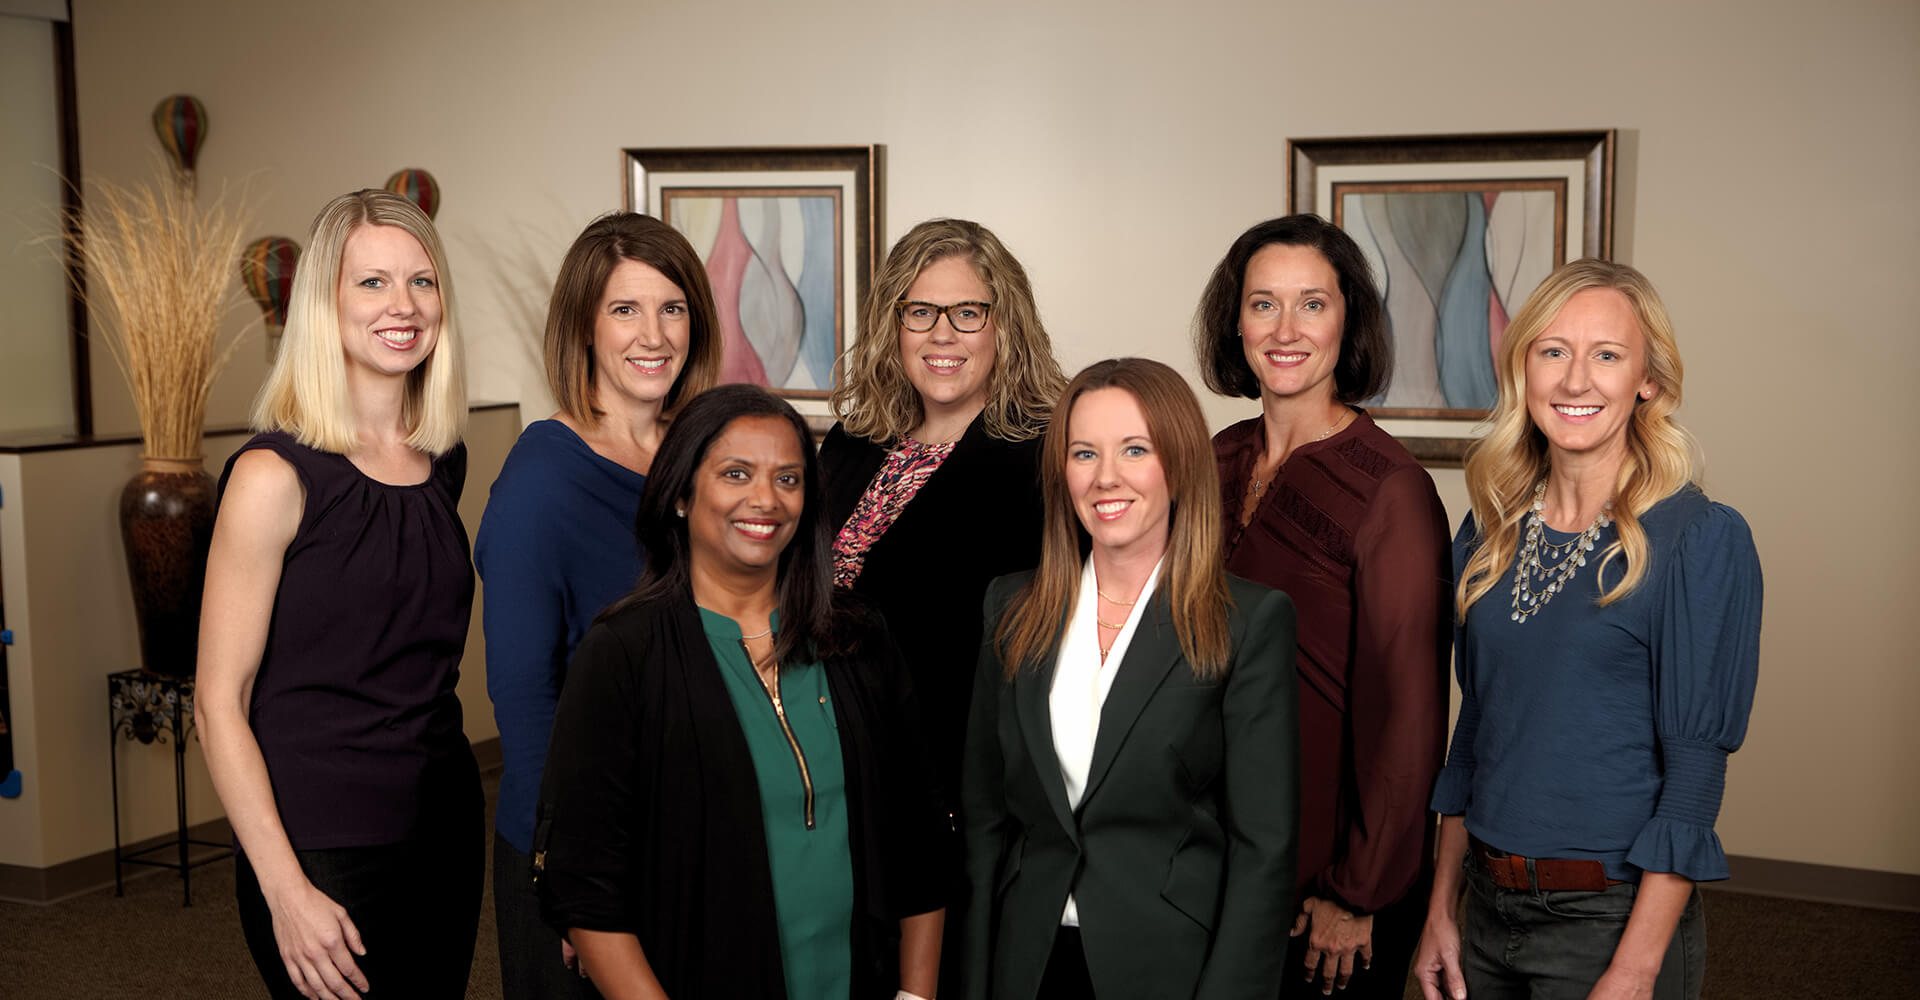 West Des Moines OBGYN All Physicians